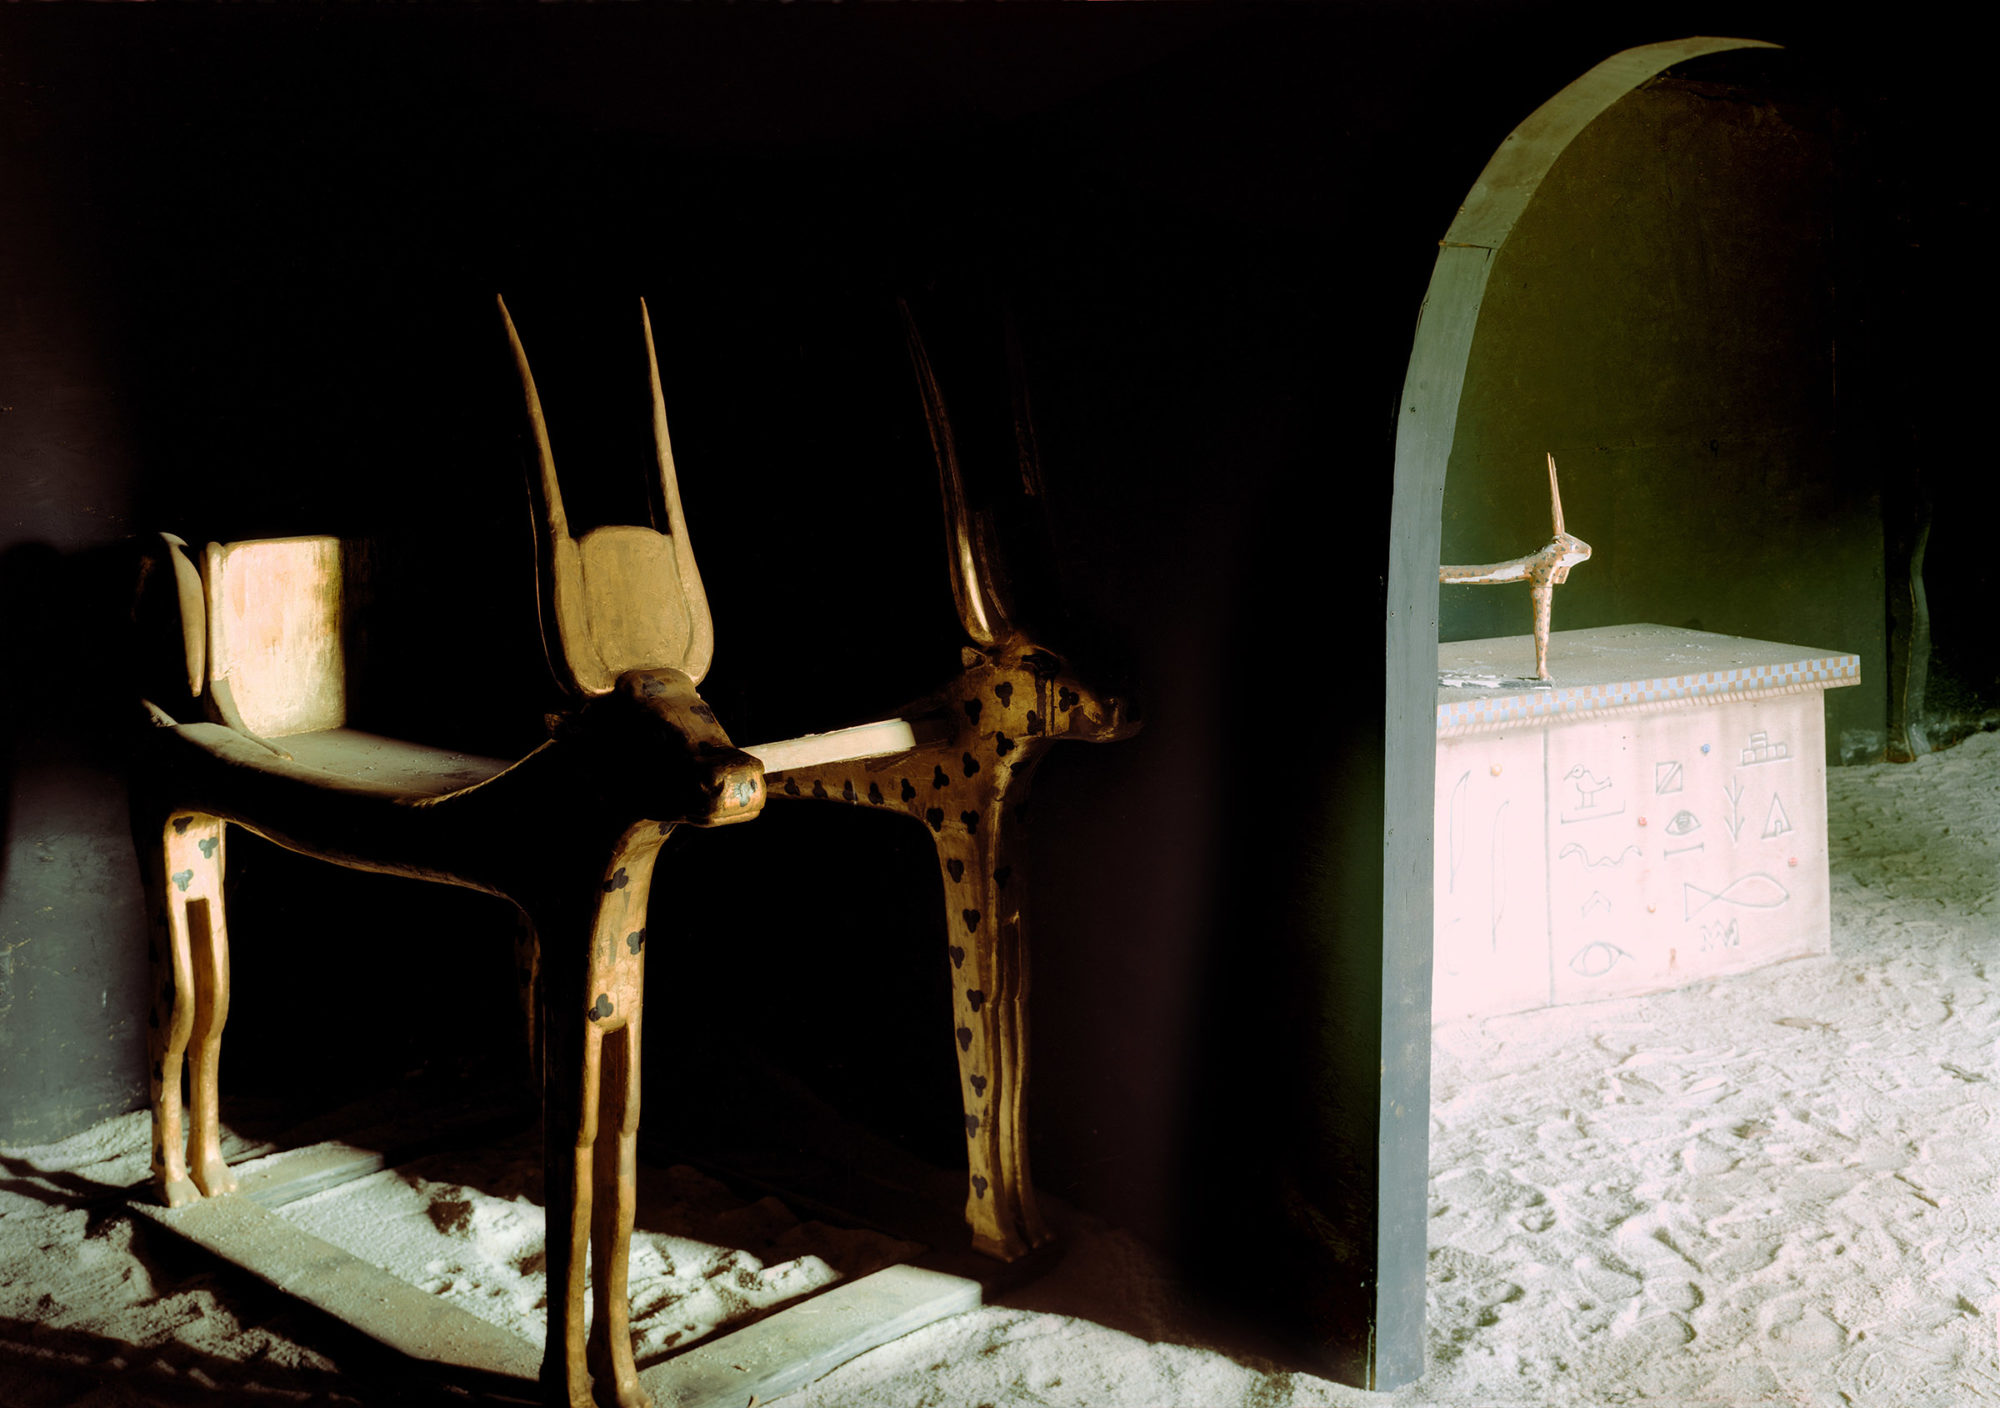 dimly lit green interior space with sand floor and Egyptian-looking wooden animal sculpture